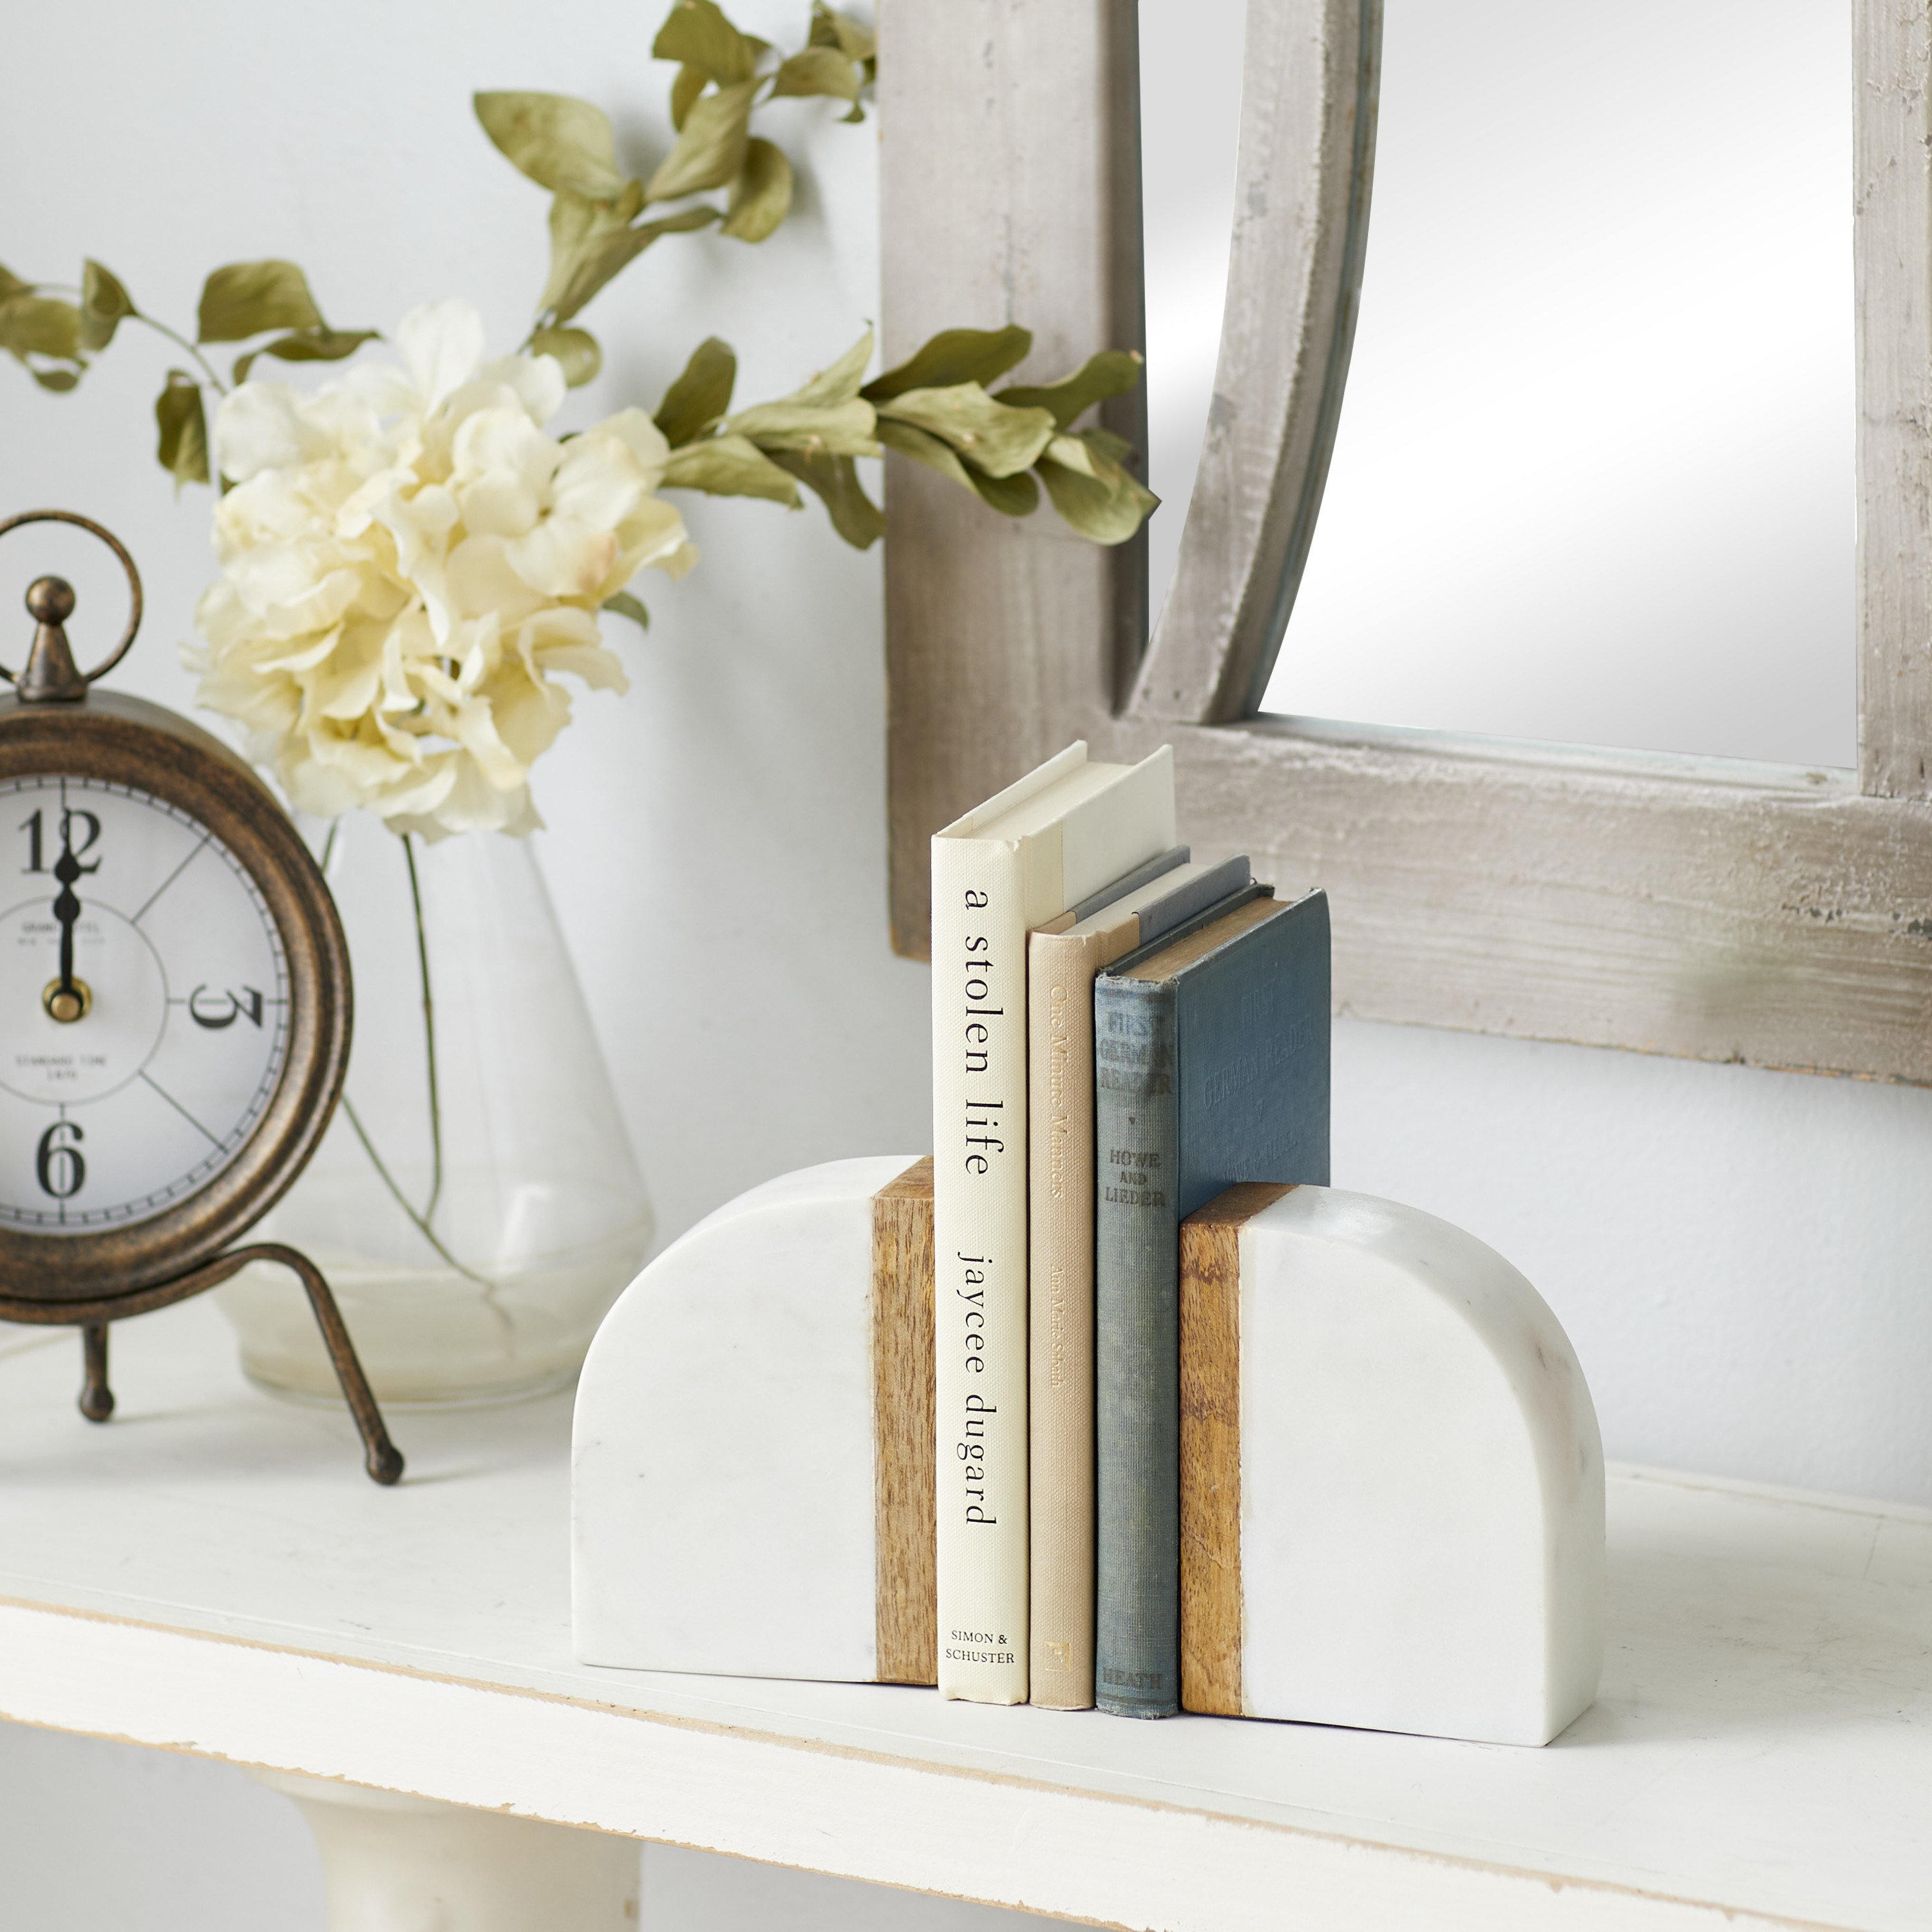 the white and brown marble bookends holding books together